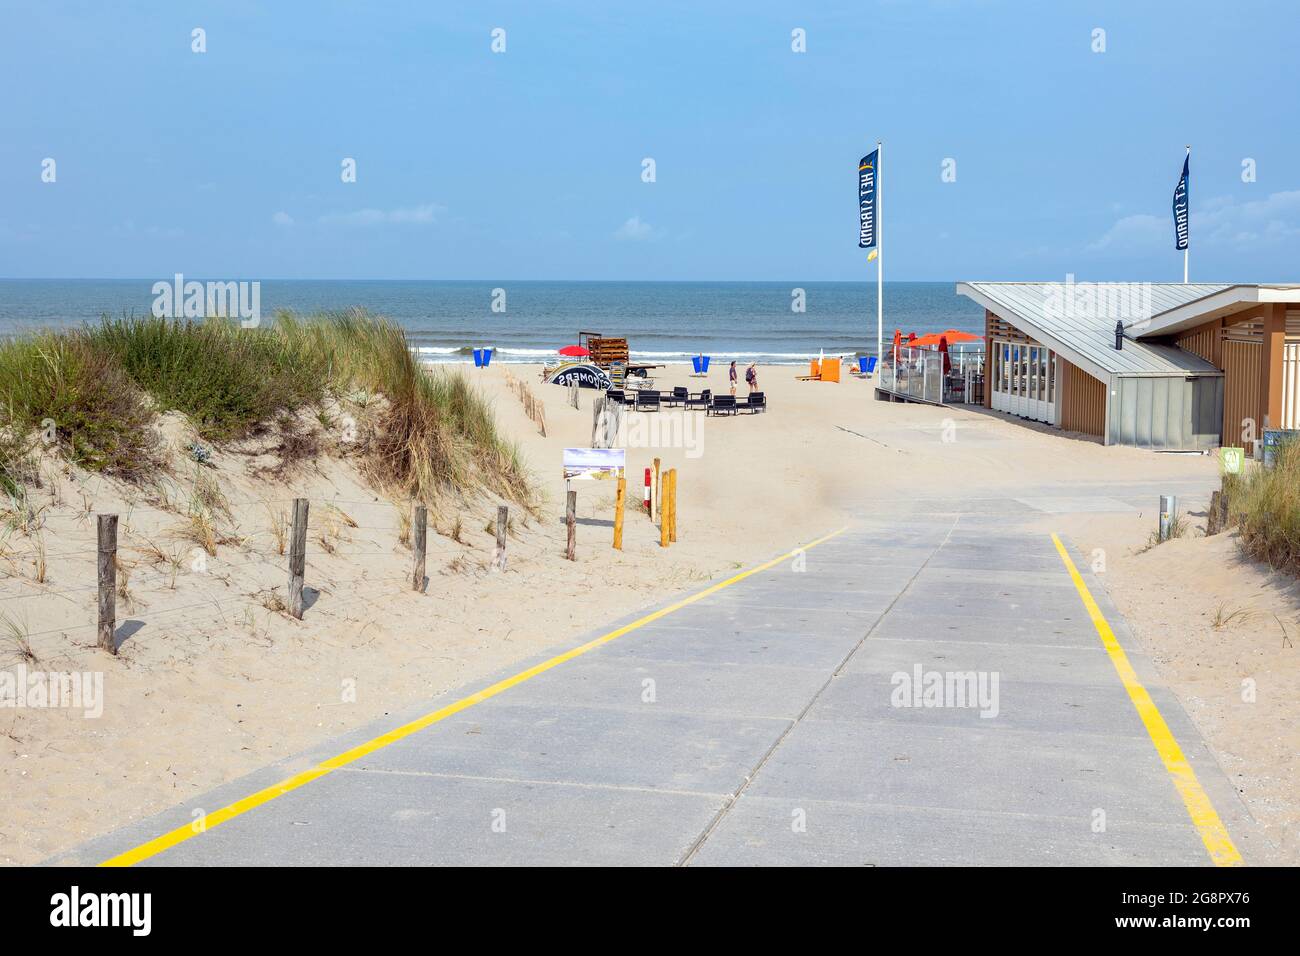 Summertime along the North Sea: Inviting view of the beach in Katwijk, South Holland, The Netherlands, a popular seaside resort. Stock Photo